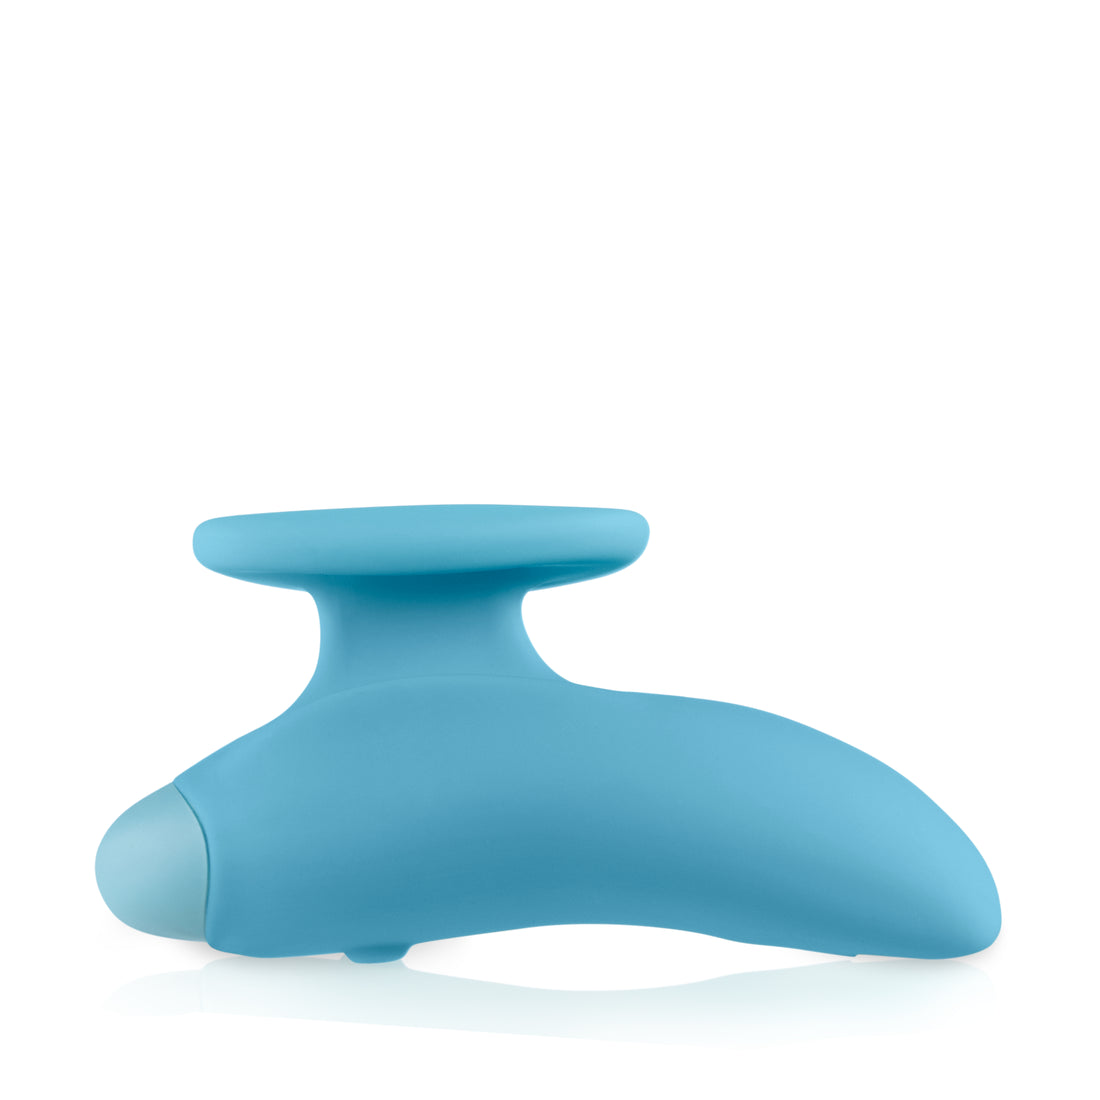 Self + Jimmyjane vibrating massager with finger grip in light blue laying on table